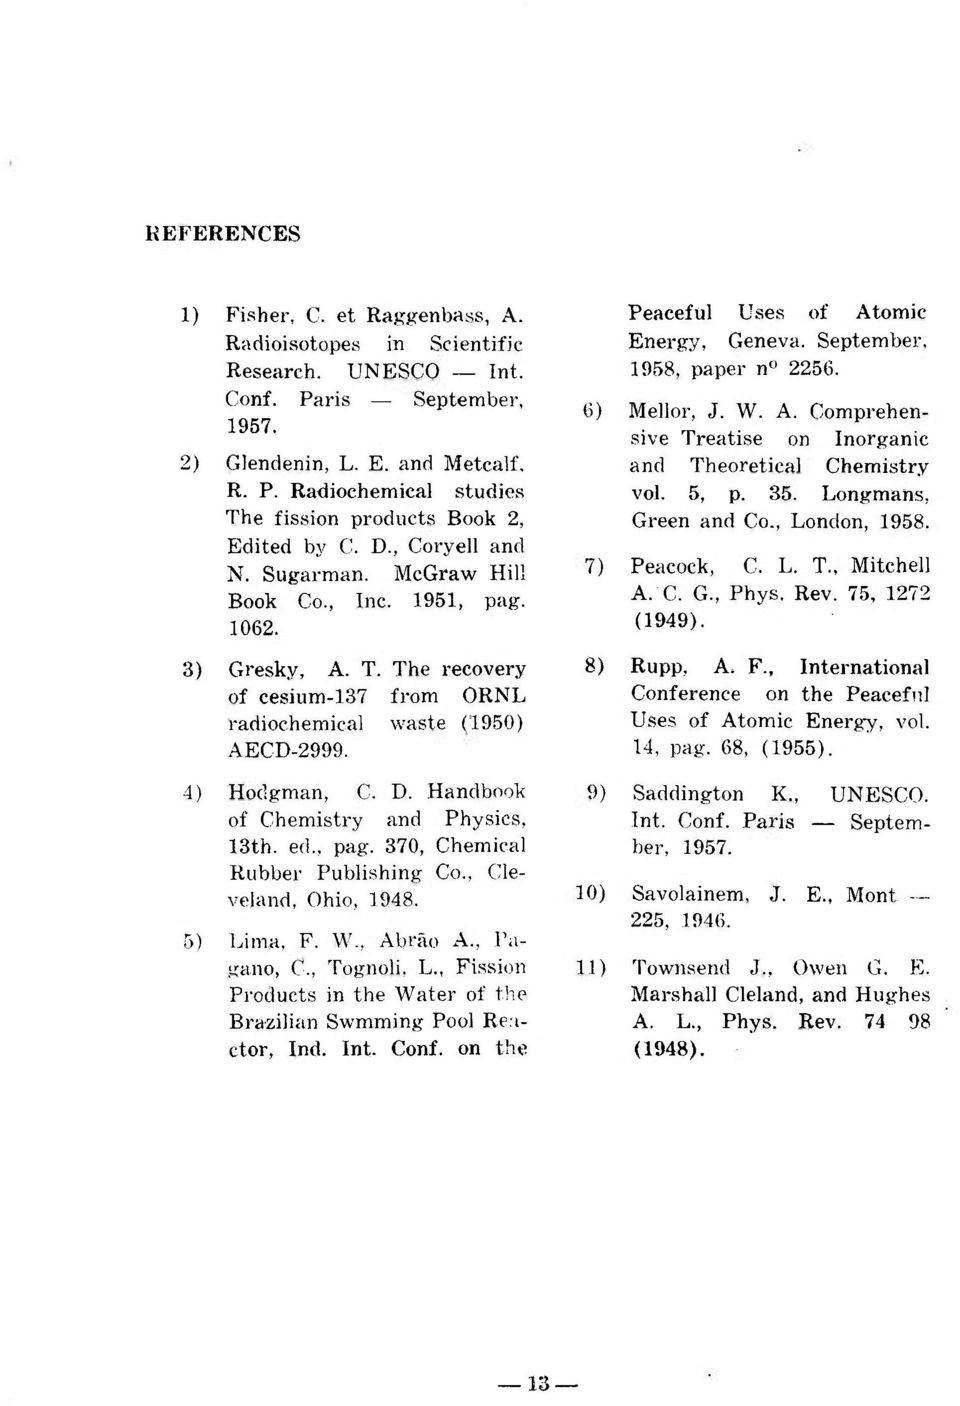 Handbook of Chemistry and Physics, 13th. ed., pag. 370, Chemical Rubber Publishing Co., Cleveland, Ohio, 1948. 5) Lima, F. W., Abrão A., Pagano, C, Tognoli, L.